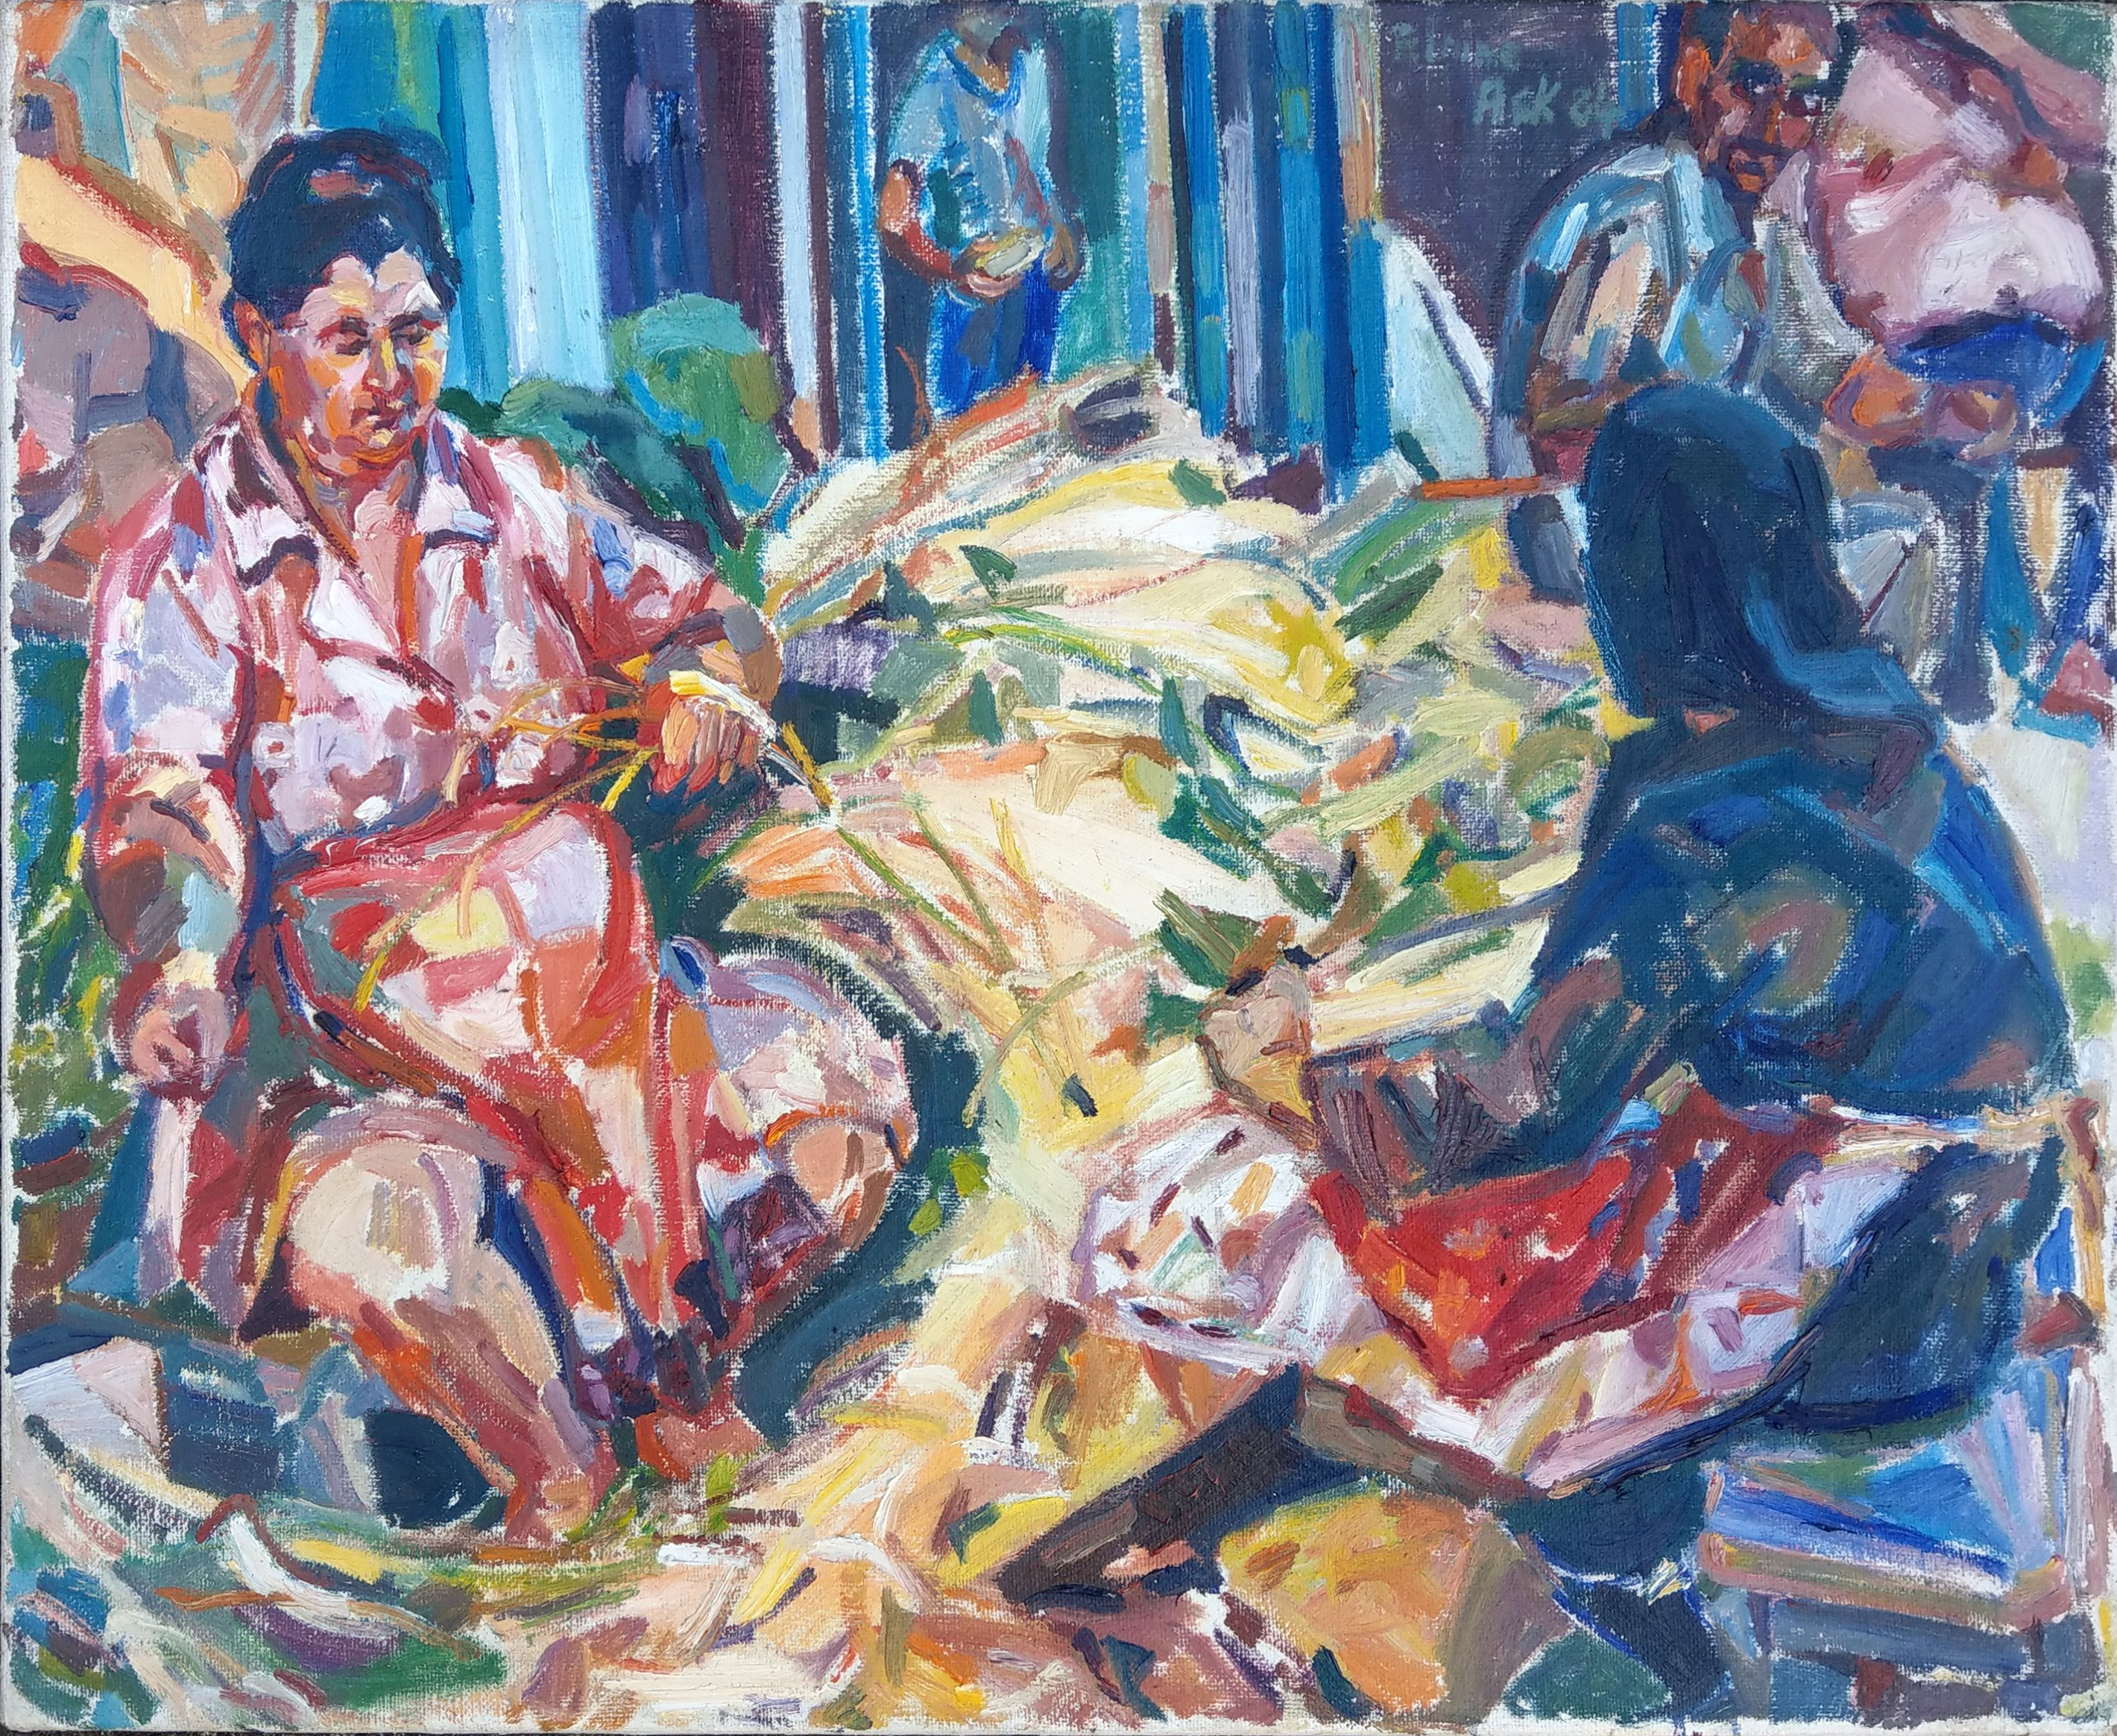 Greek villagers in Sarti, Halkidiki.  An oil painting by Elaine Ask 
oil on Canvass 1984